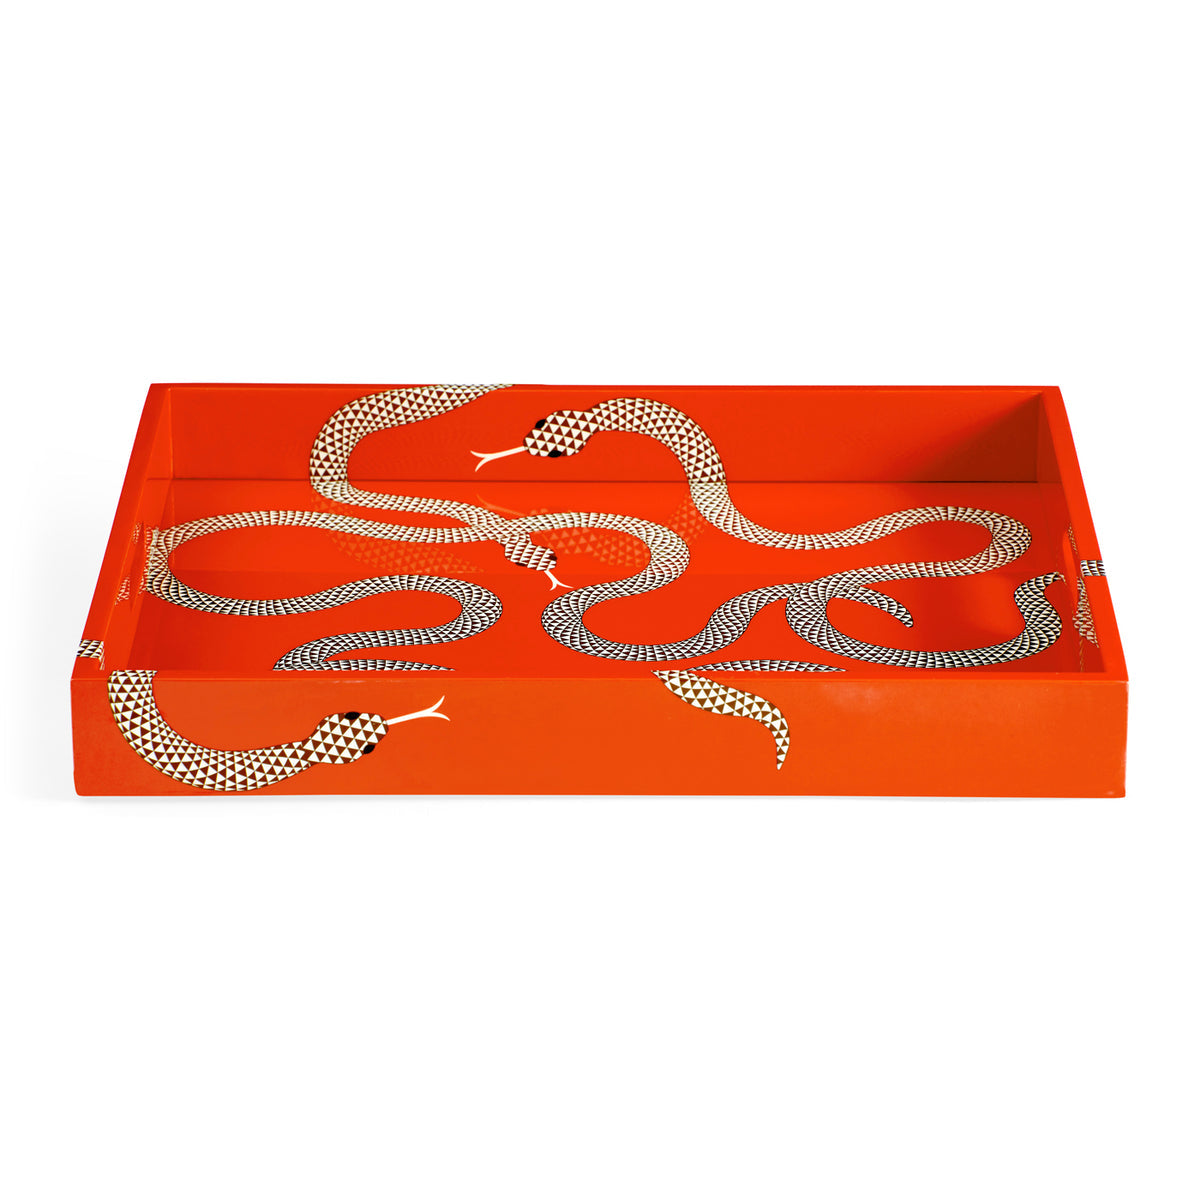 Eden Lacquer Tray by Jonathan Adler